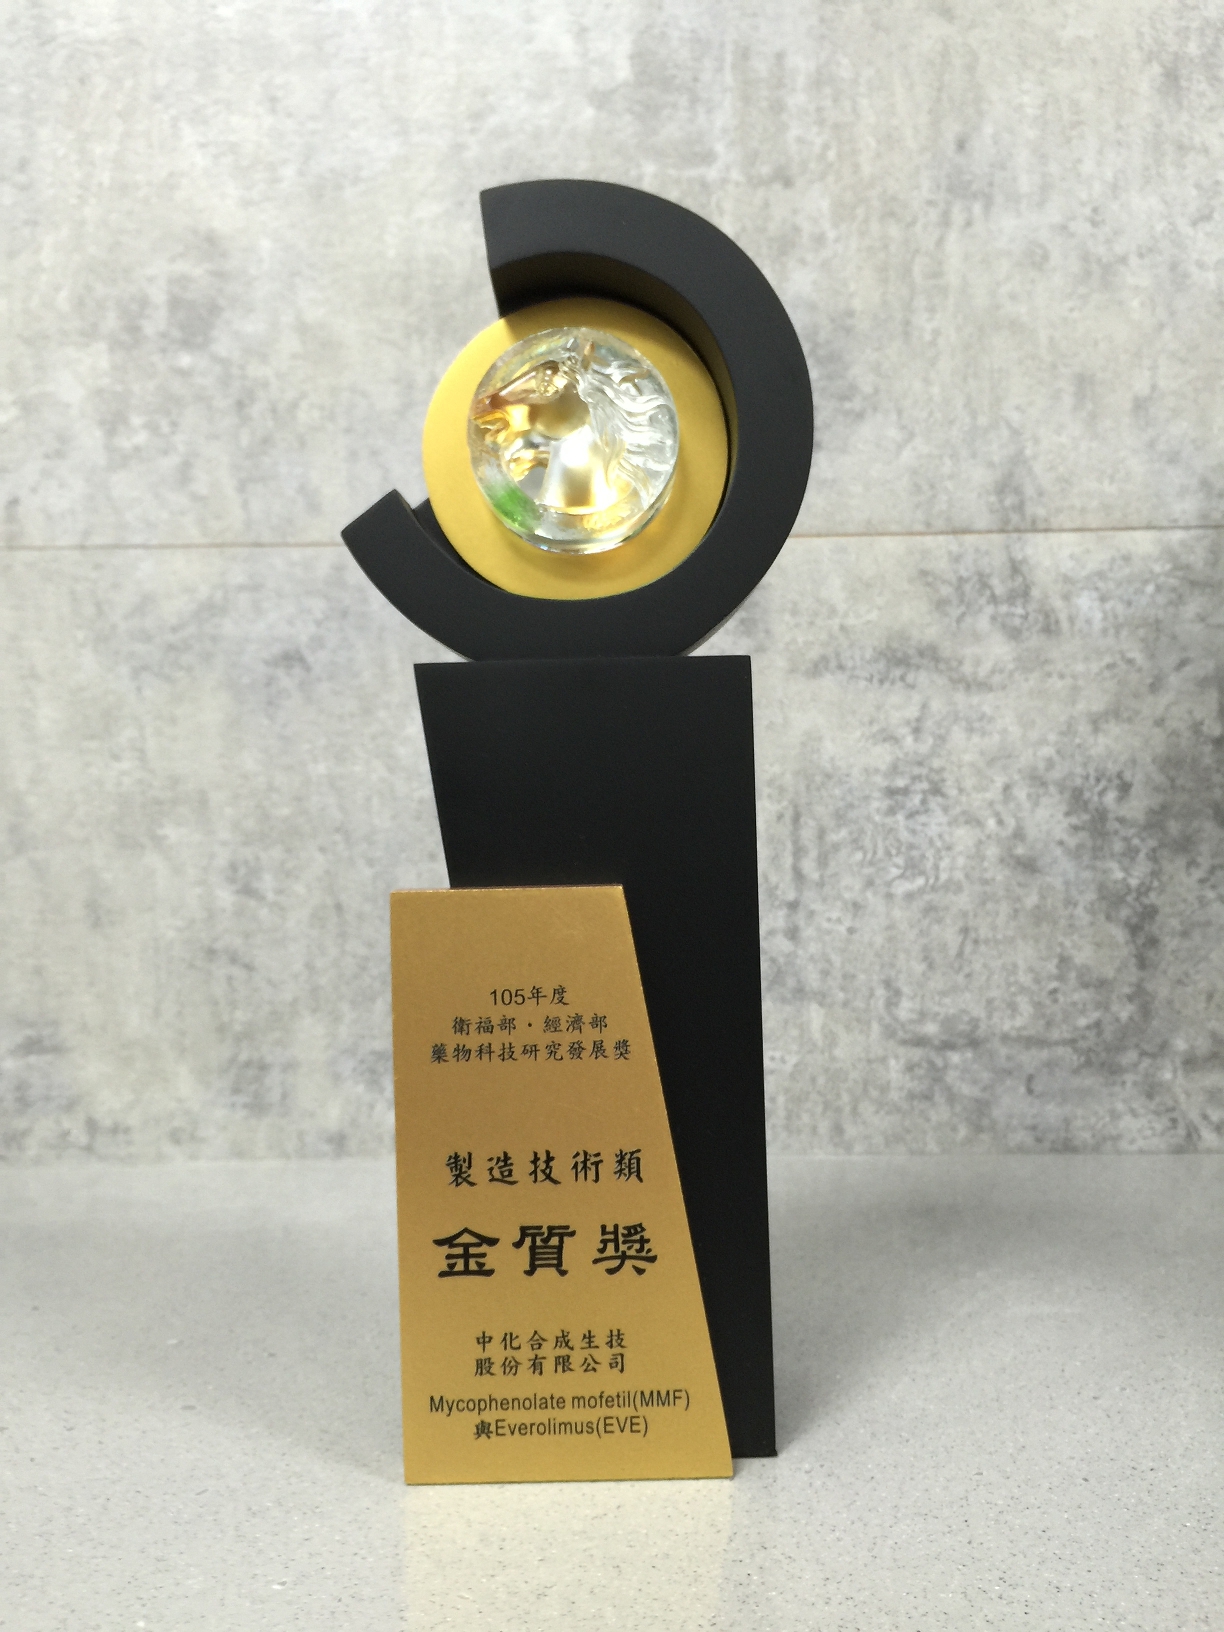 Gold Medal Award for the "Manufacturing Technology" of 2016